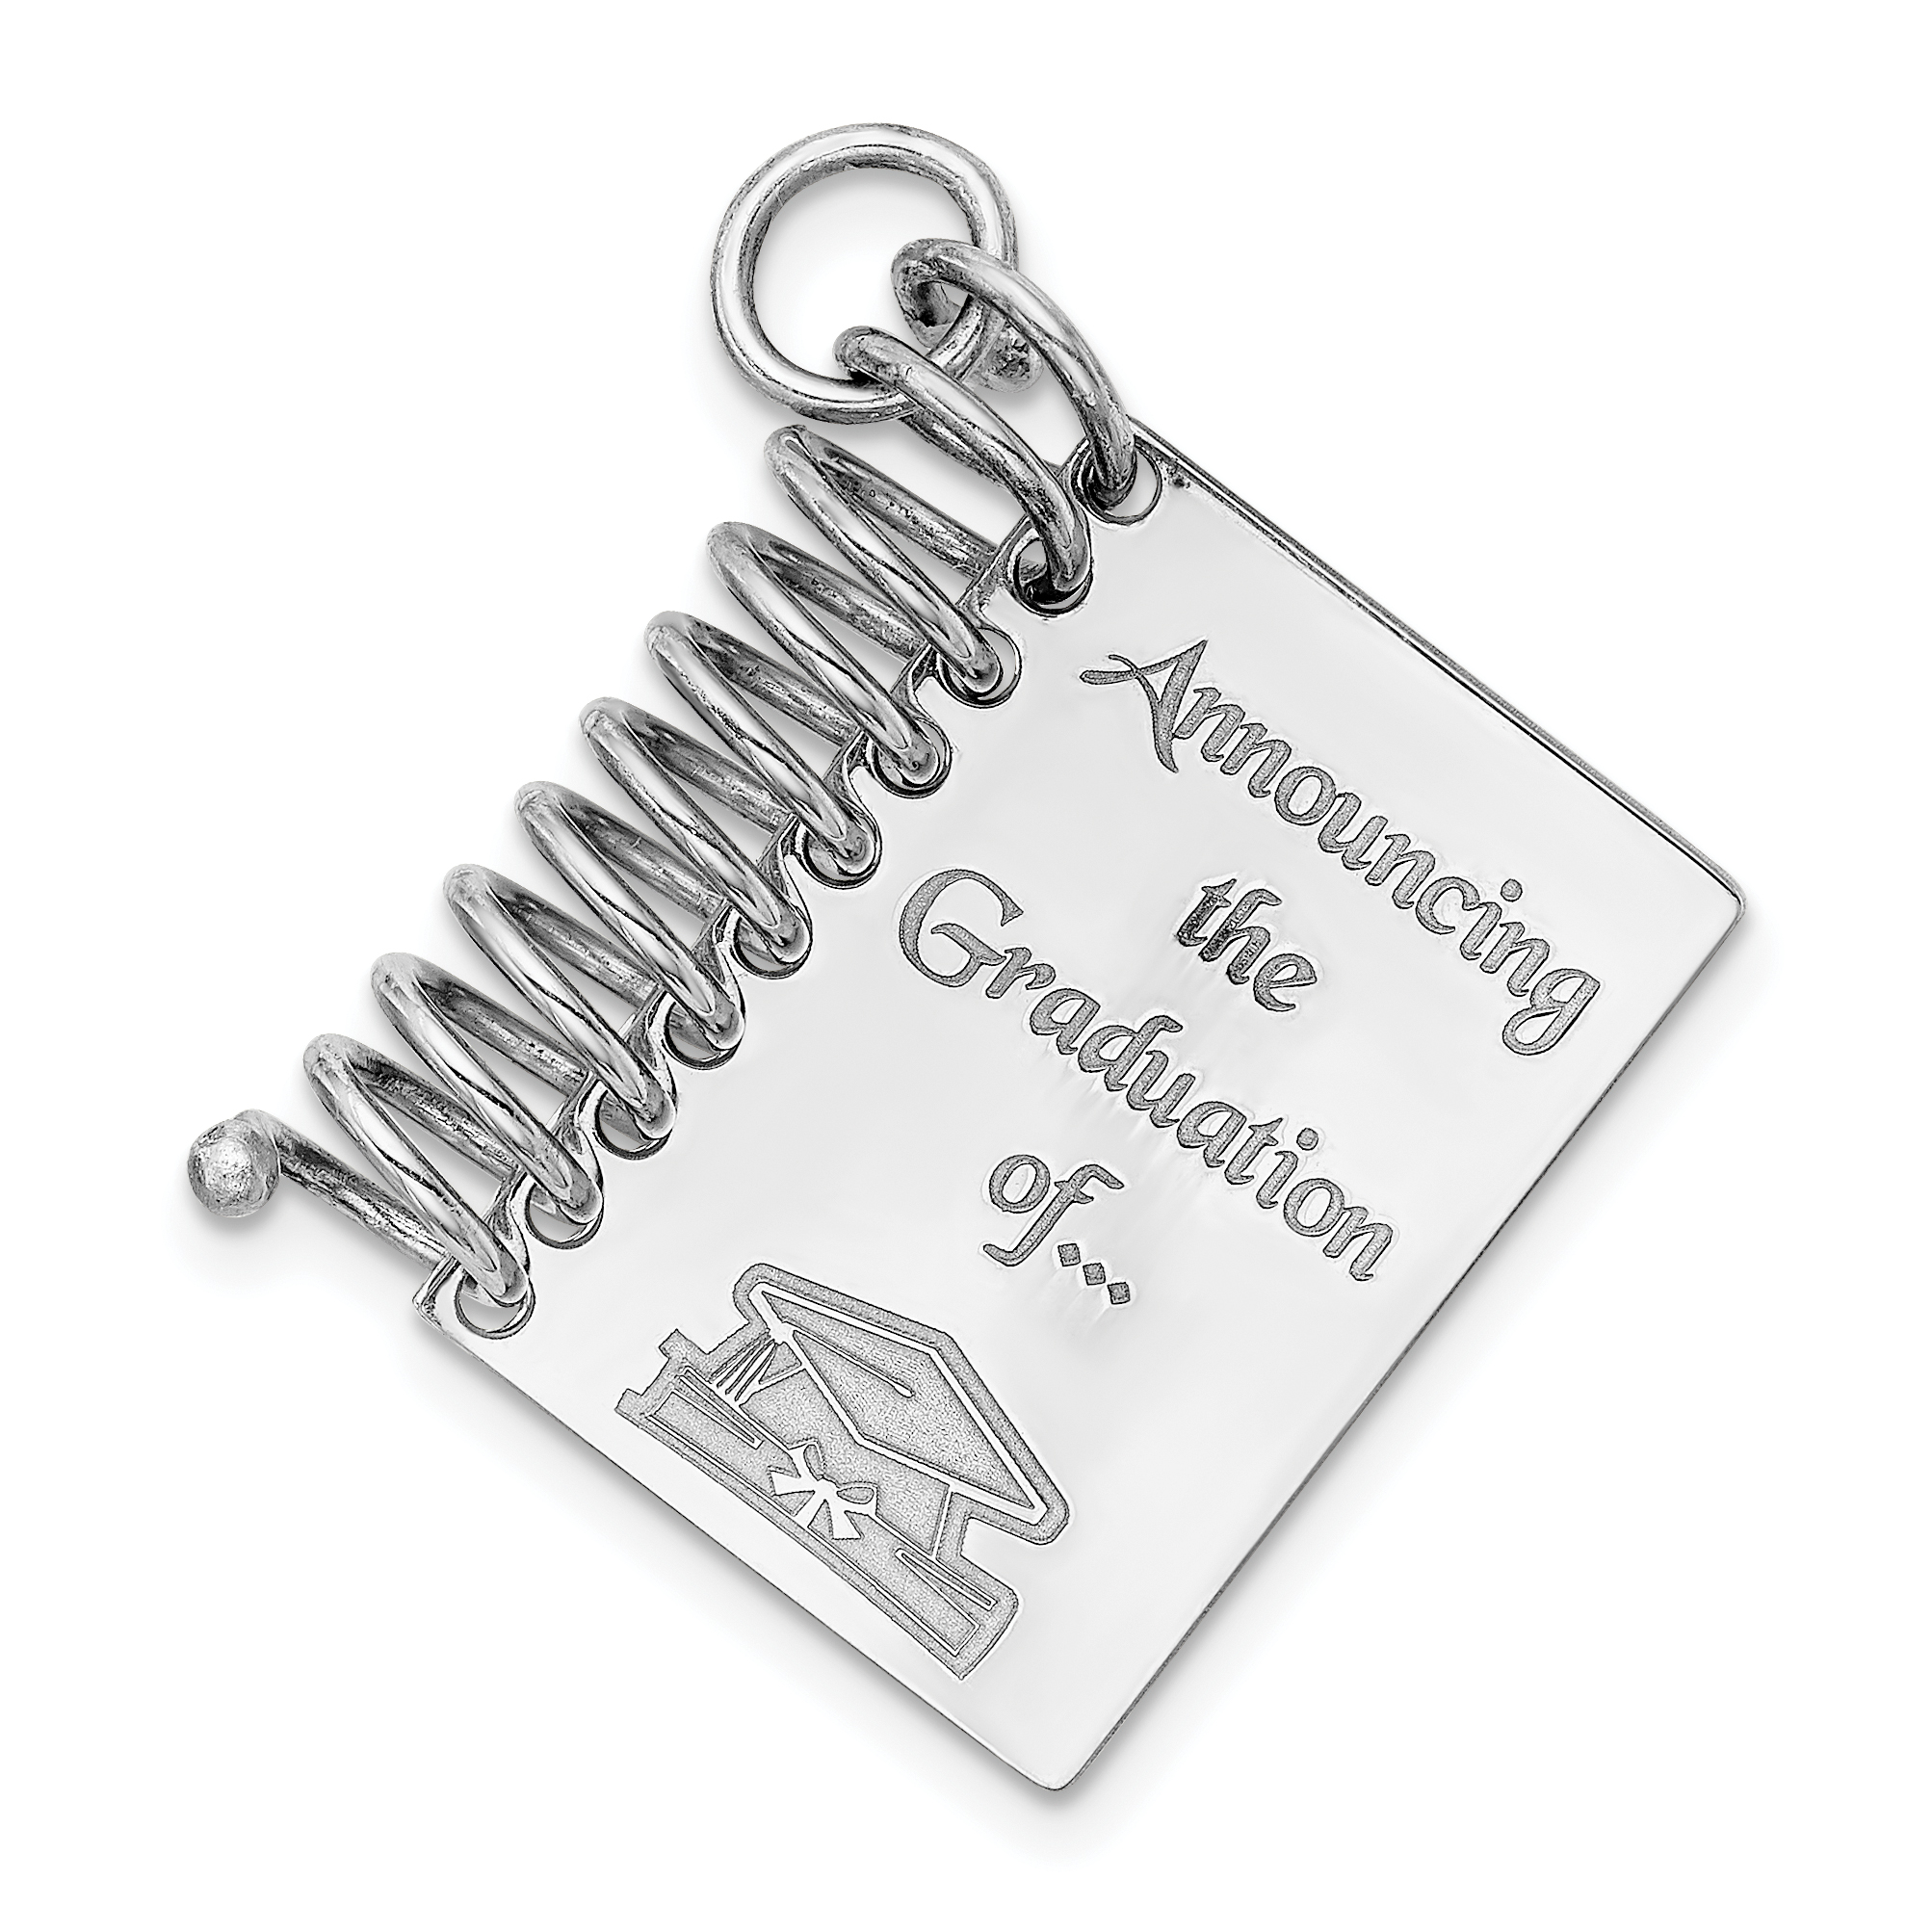 925 Sterling Silver Personalizable Graduation Book Charm Pendant - image 1 of 1